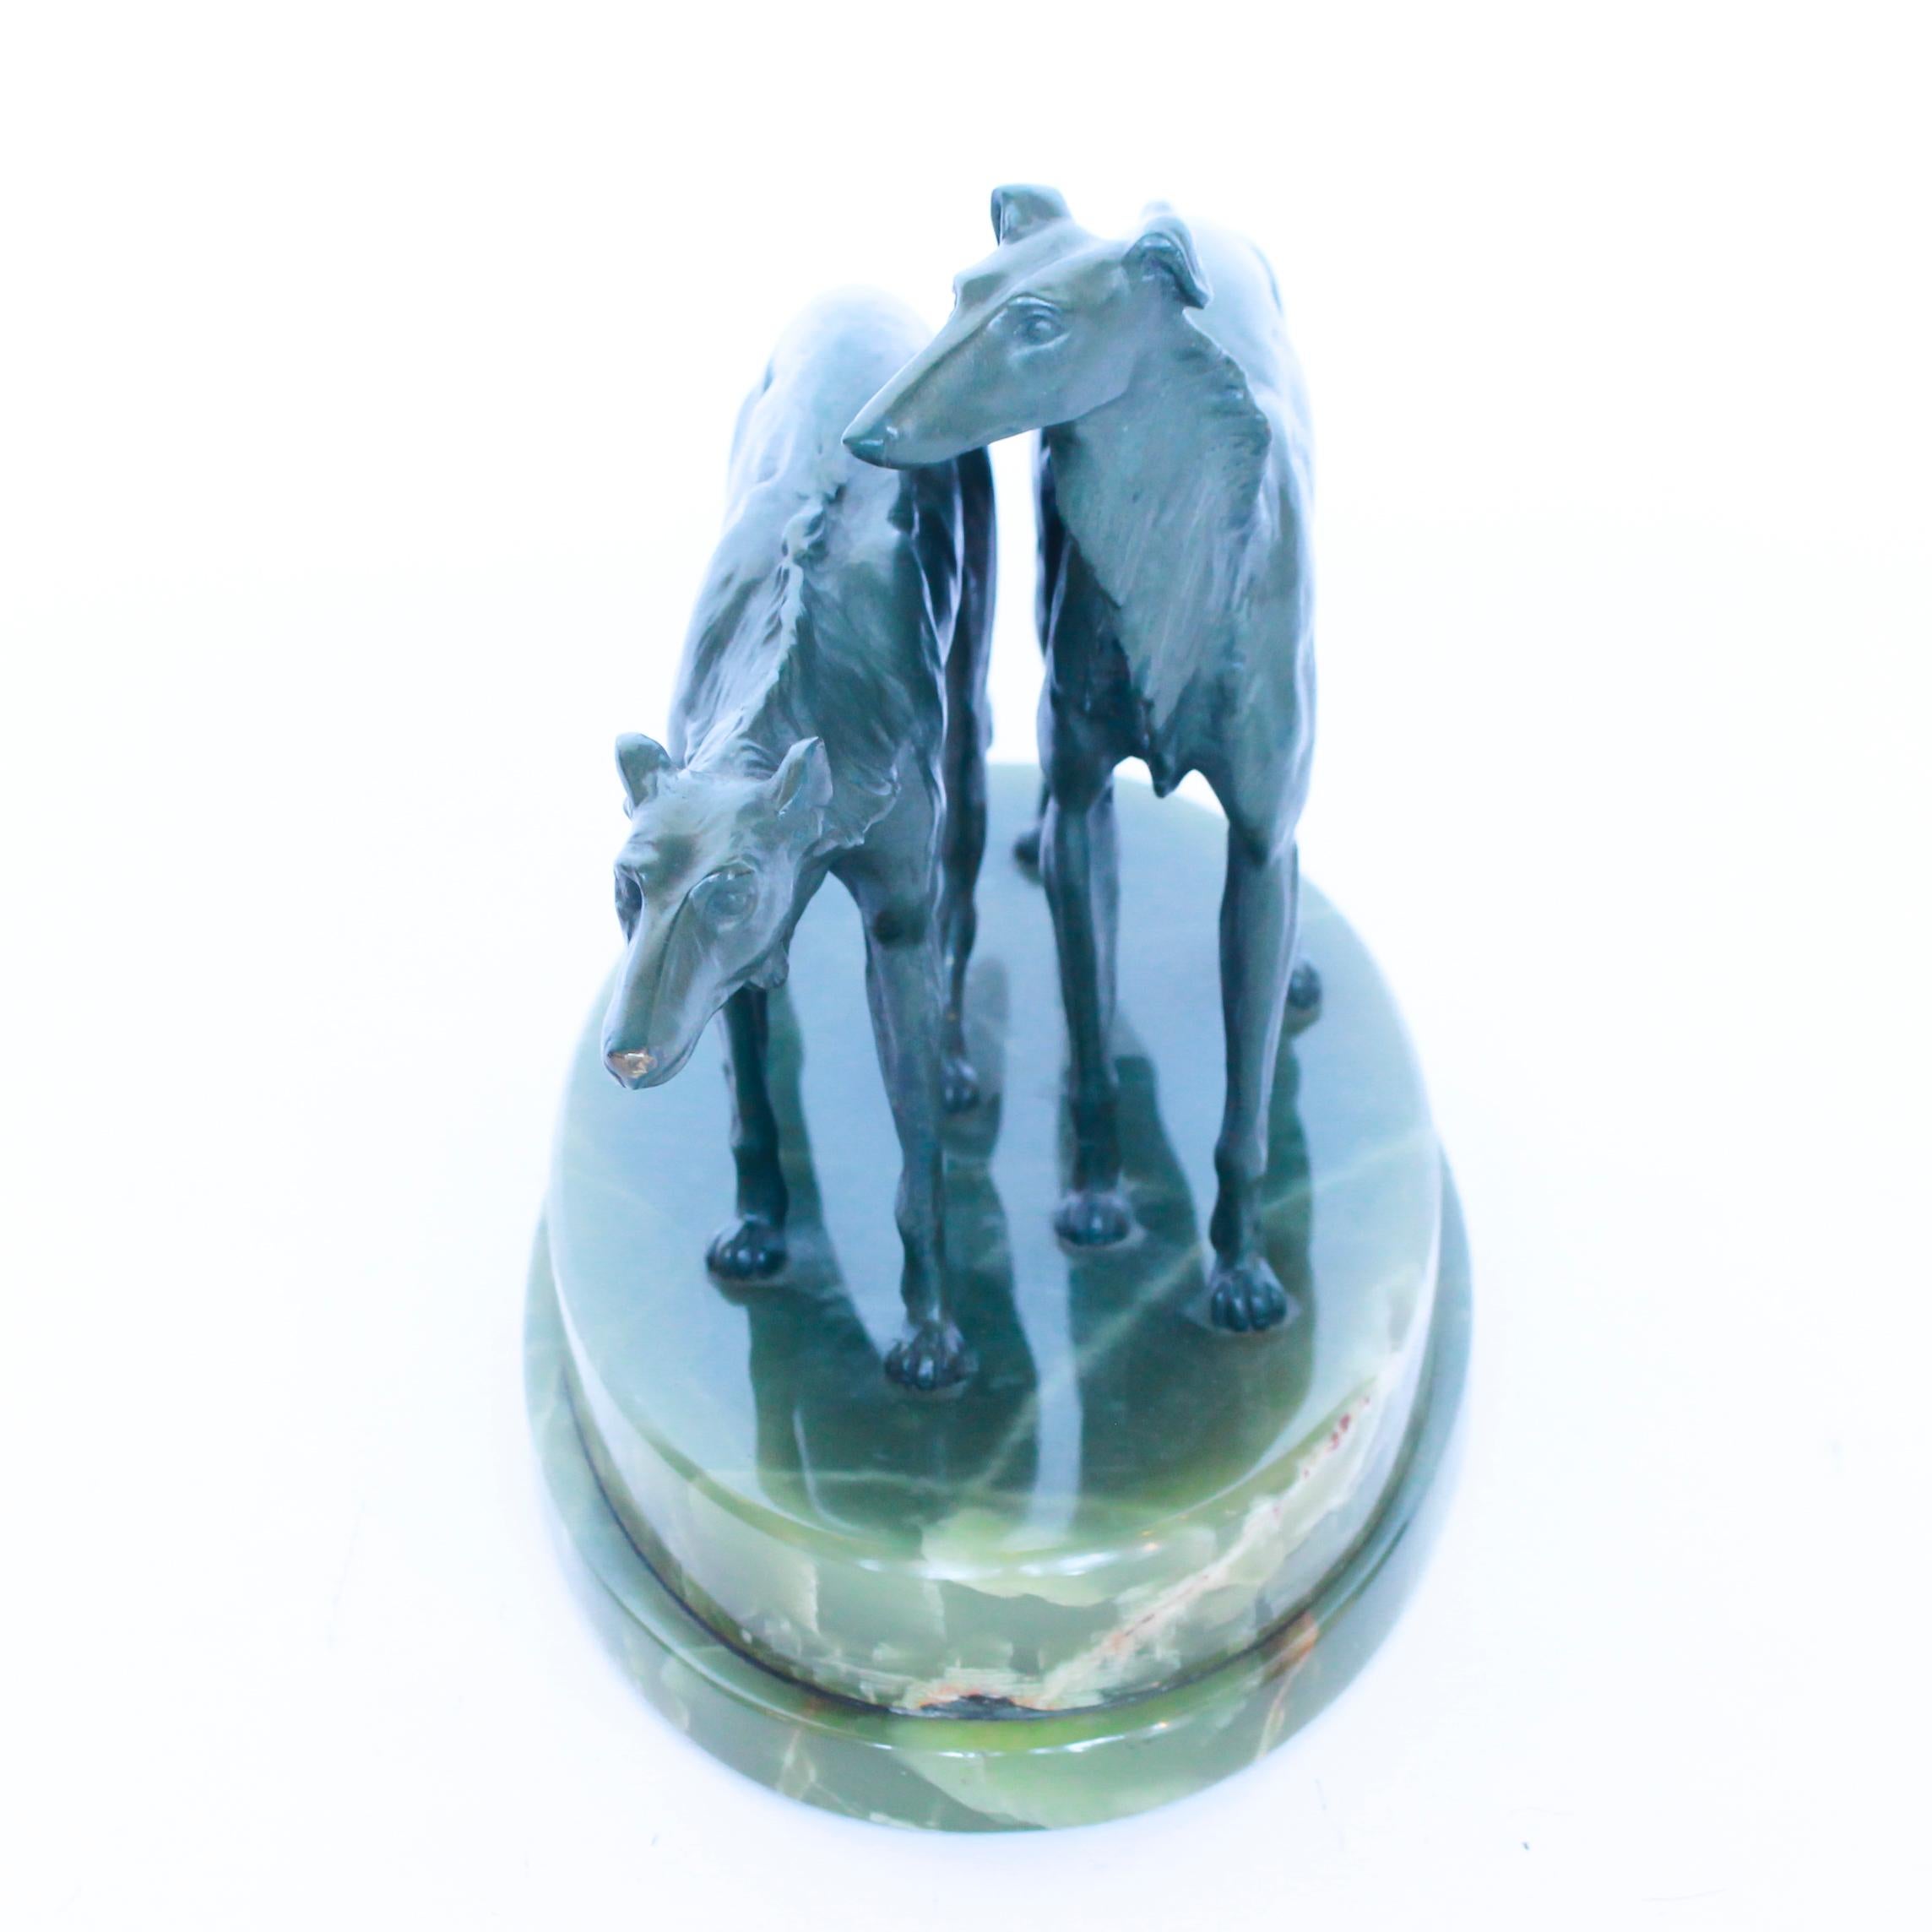 Bronze Art Deco Sculpture of Borzoi Dogs on a Green Onyx Base French, Circa 1930